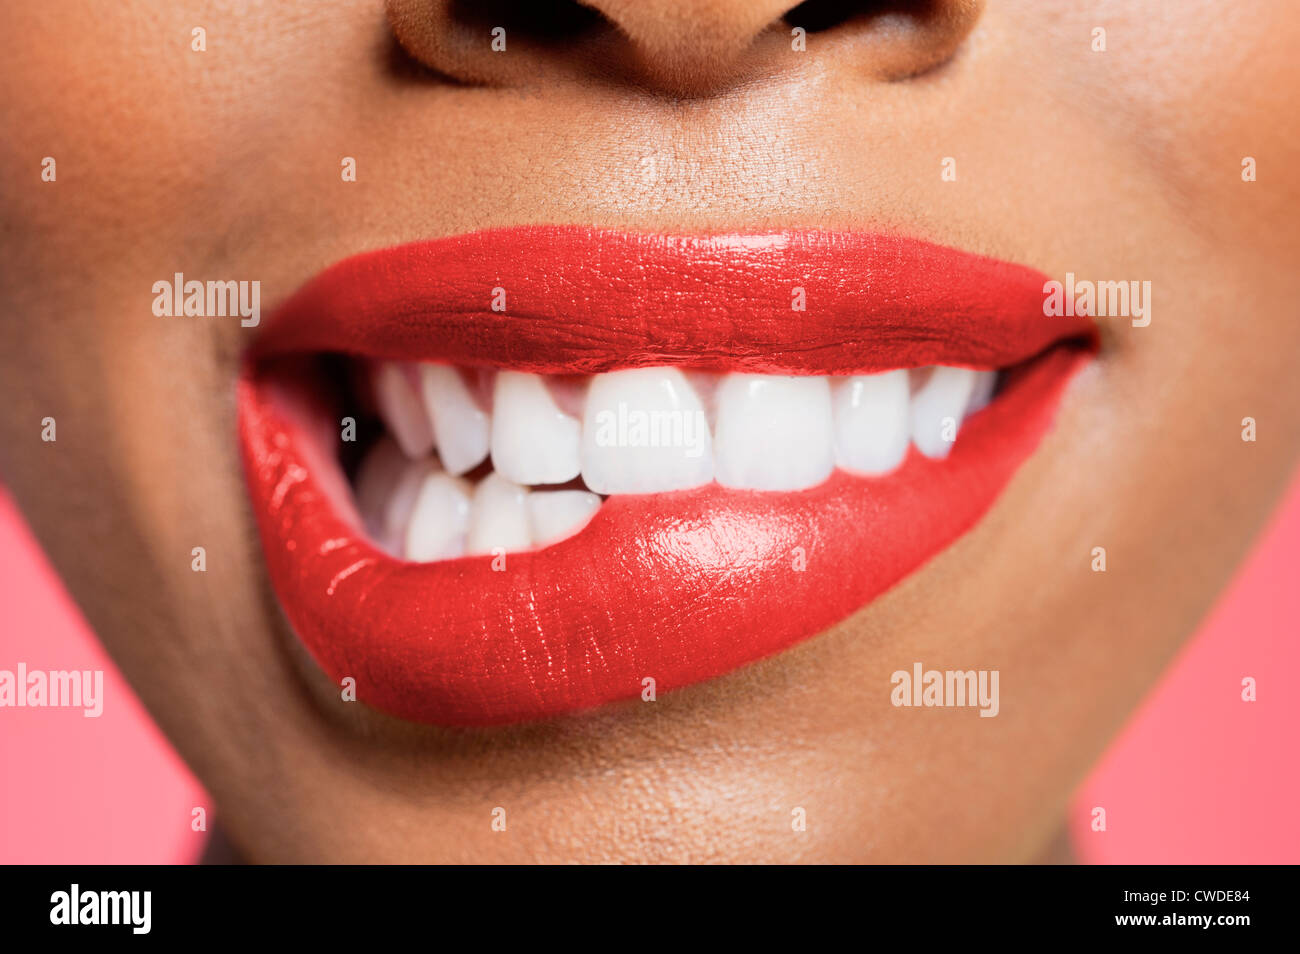 Close-up view of an female biting her red lip over colored background Stock Photo